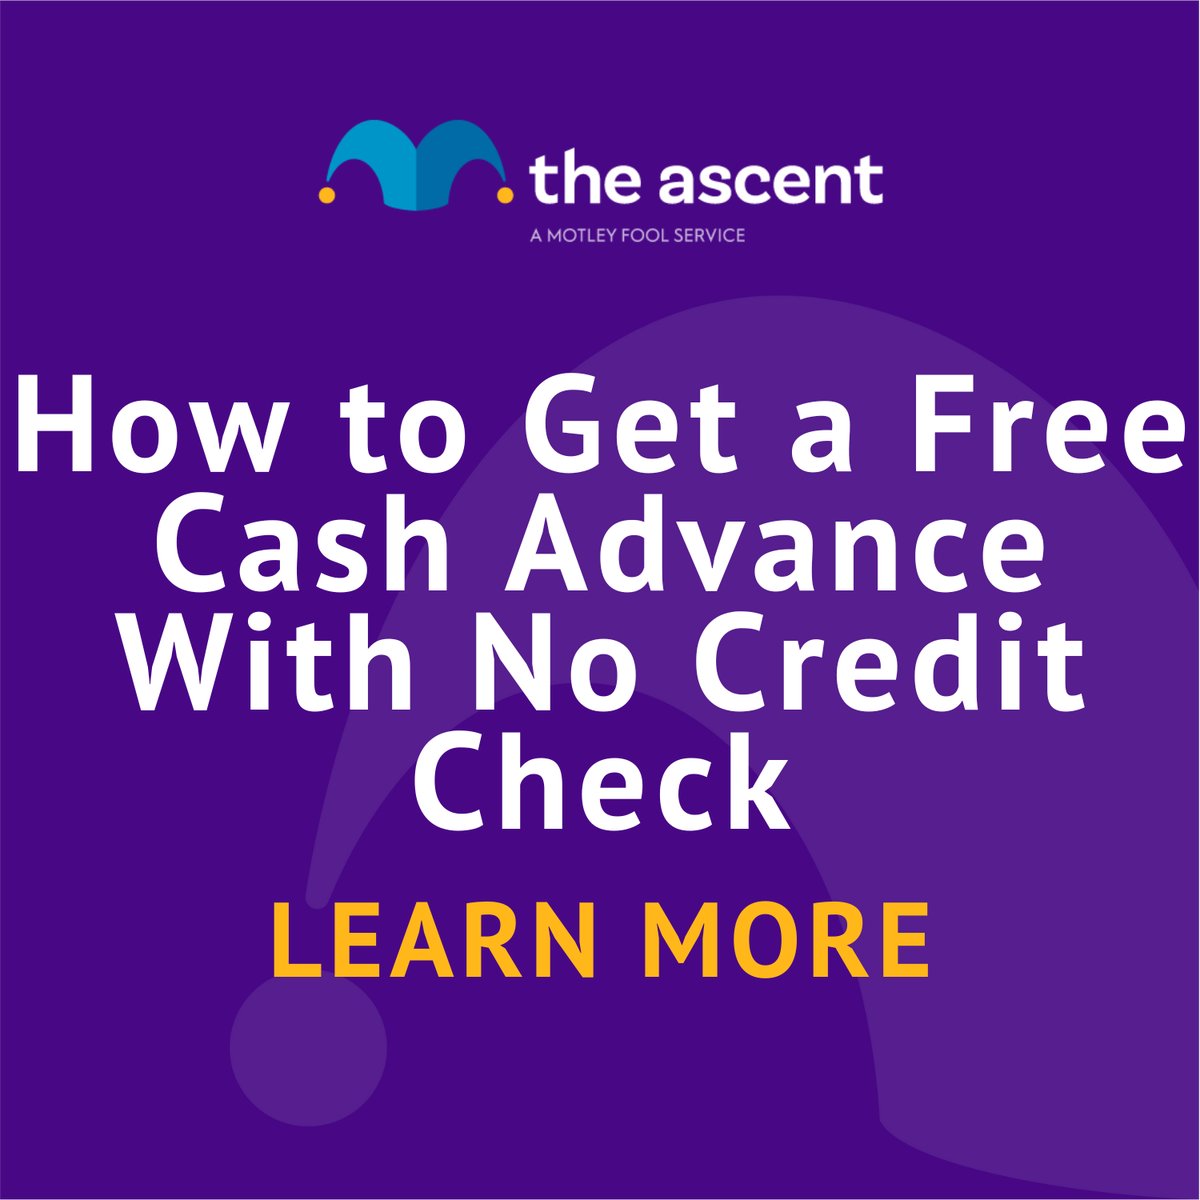 How to Get a Free Cash Advance With No Credit Check